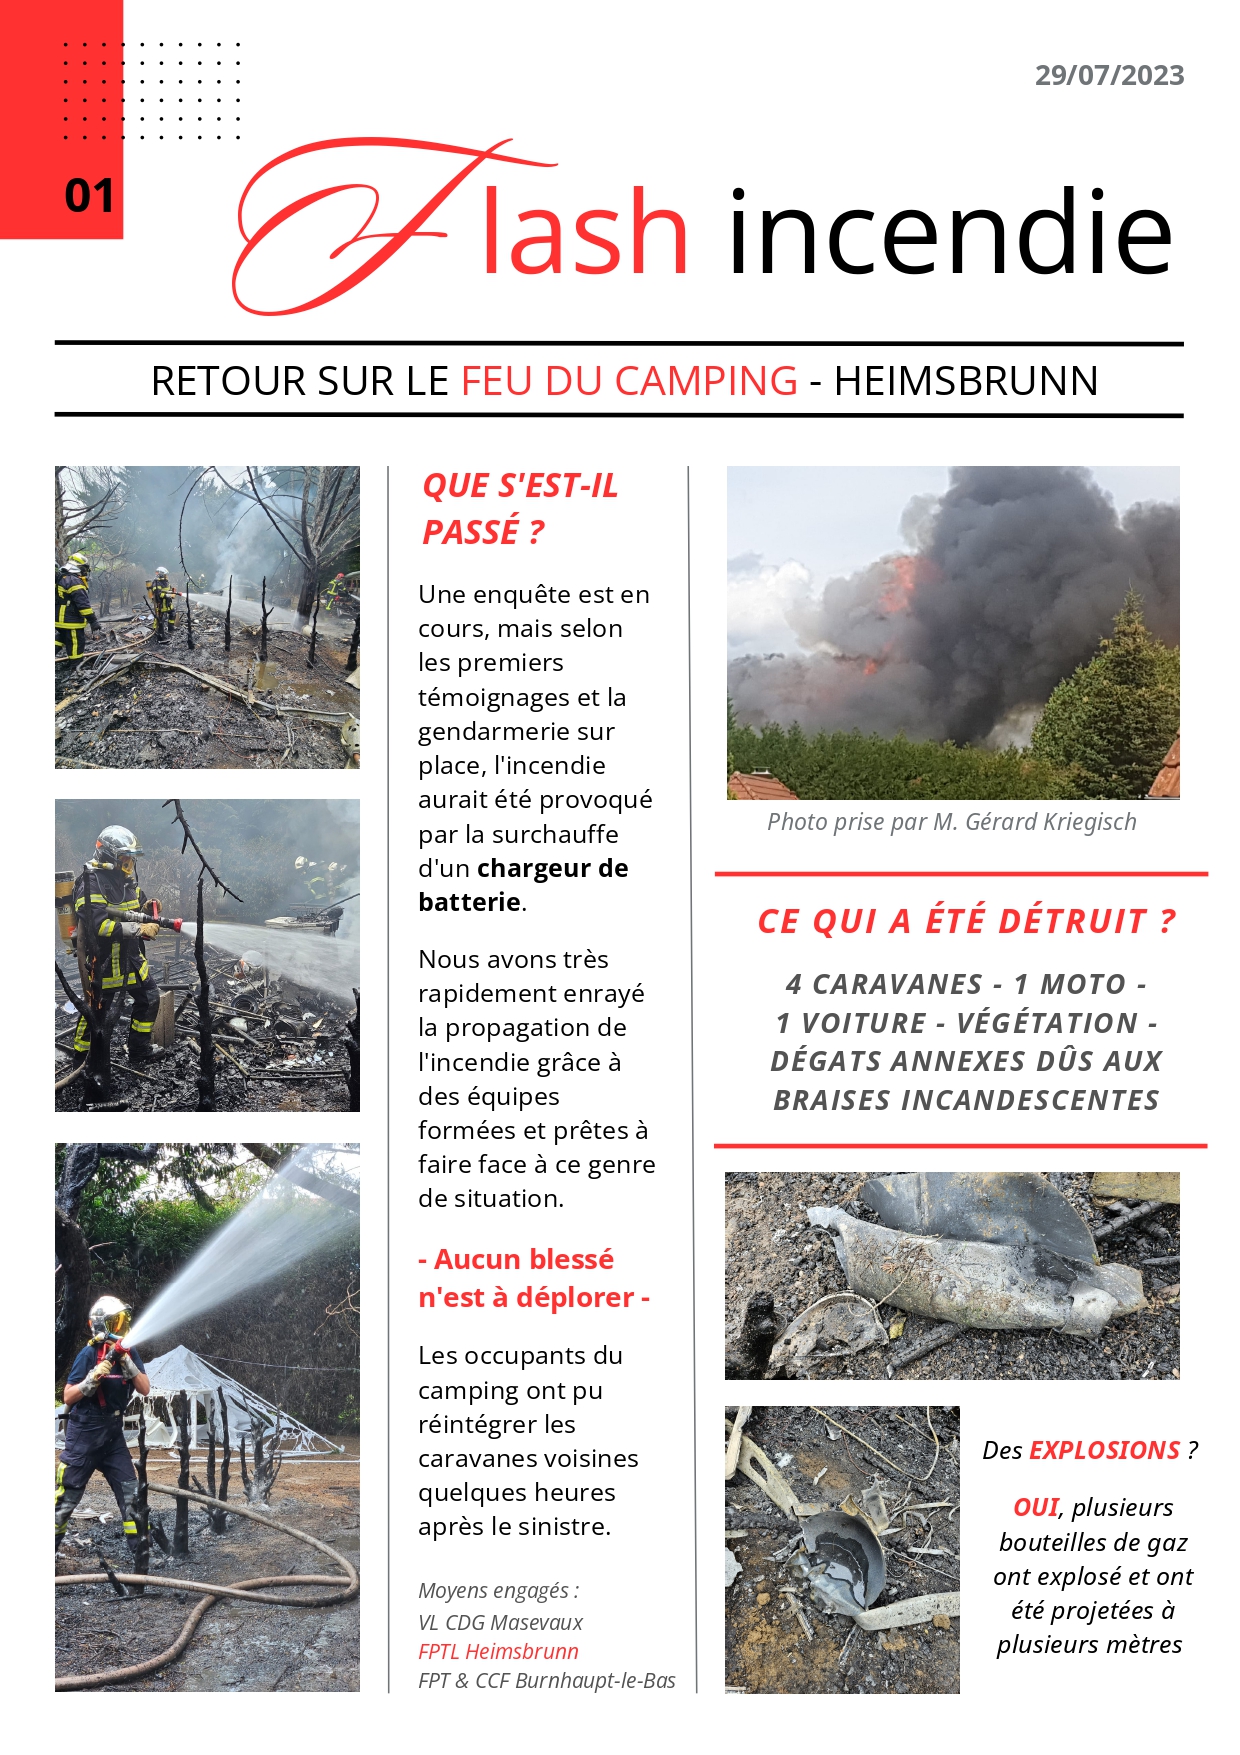 Article CPI Heimsbrunn - Incendie Camping - 07.2023_page-0001.jpg